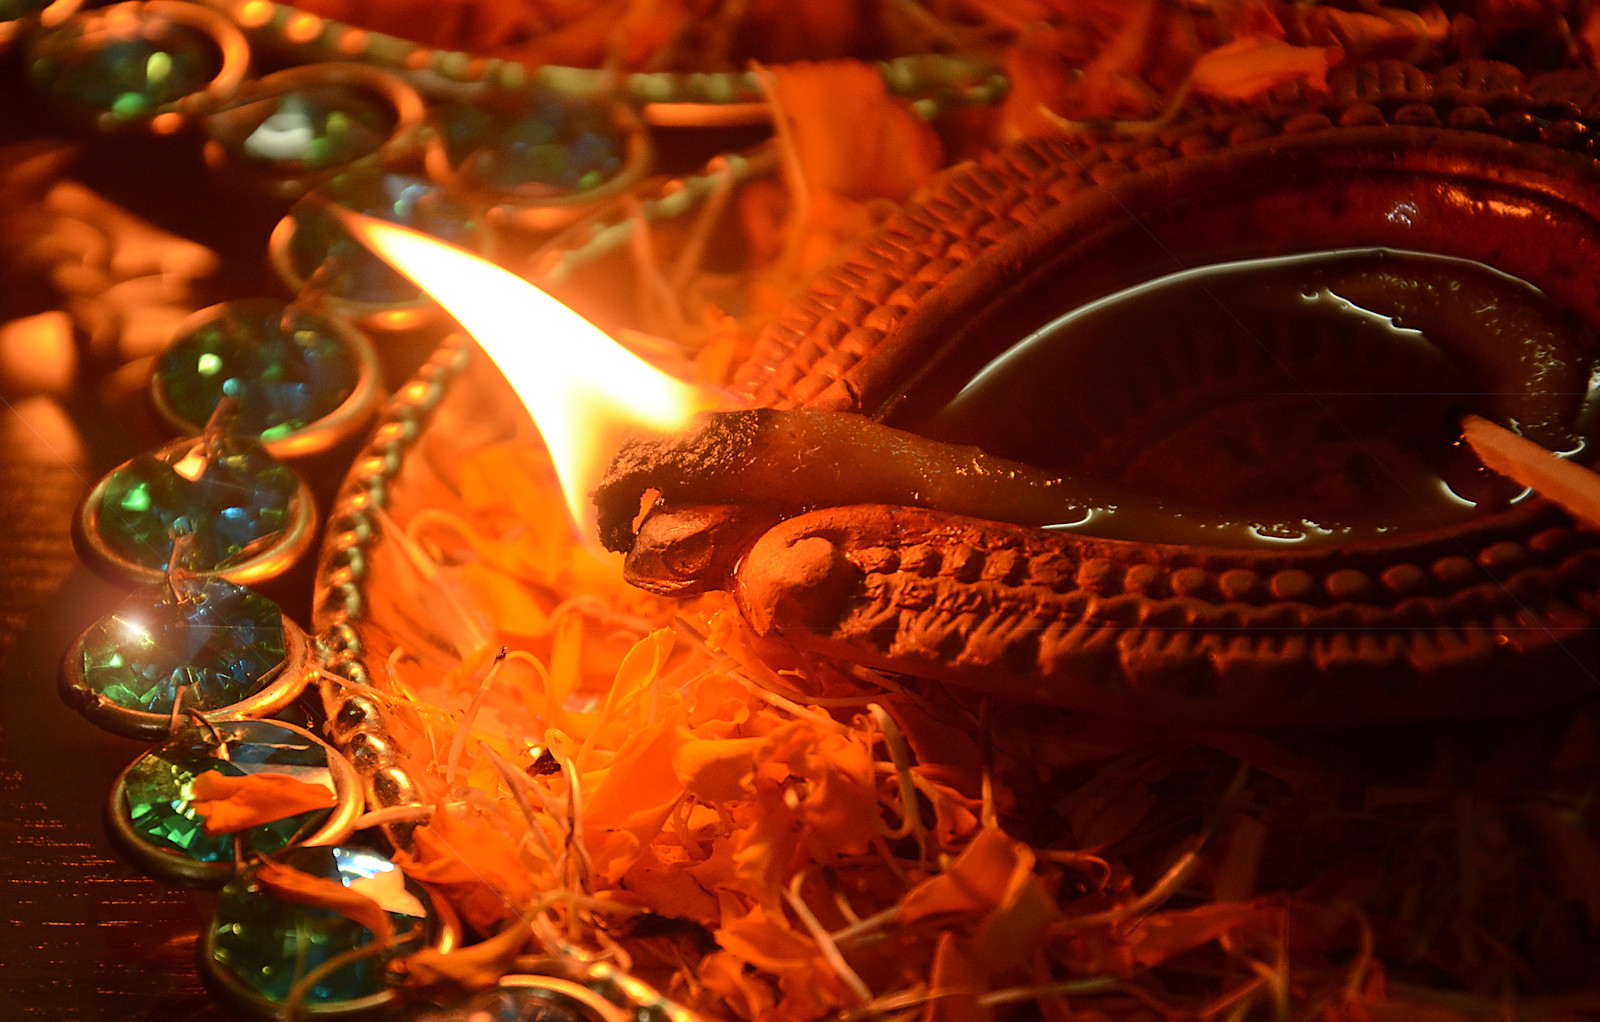 Traditional Diwali diya, set on a small bejeweled dish, covered with flower petals. Inside the diya, a large wick is burning. The entire image is cast in warm orange light from the flame of the wick. 